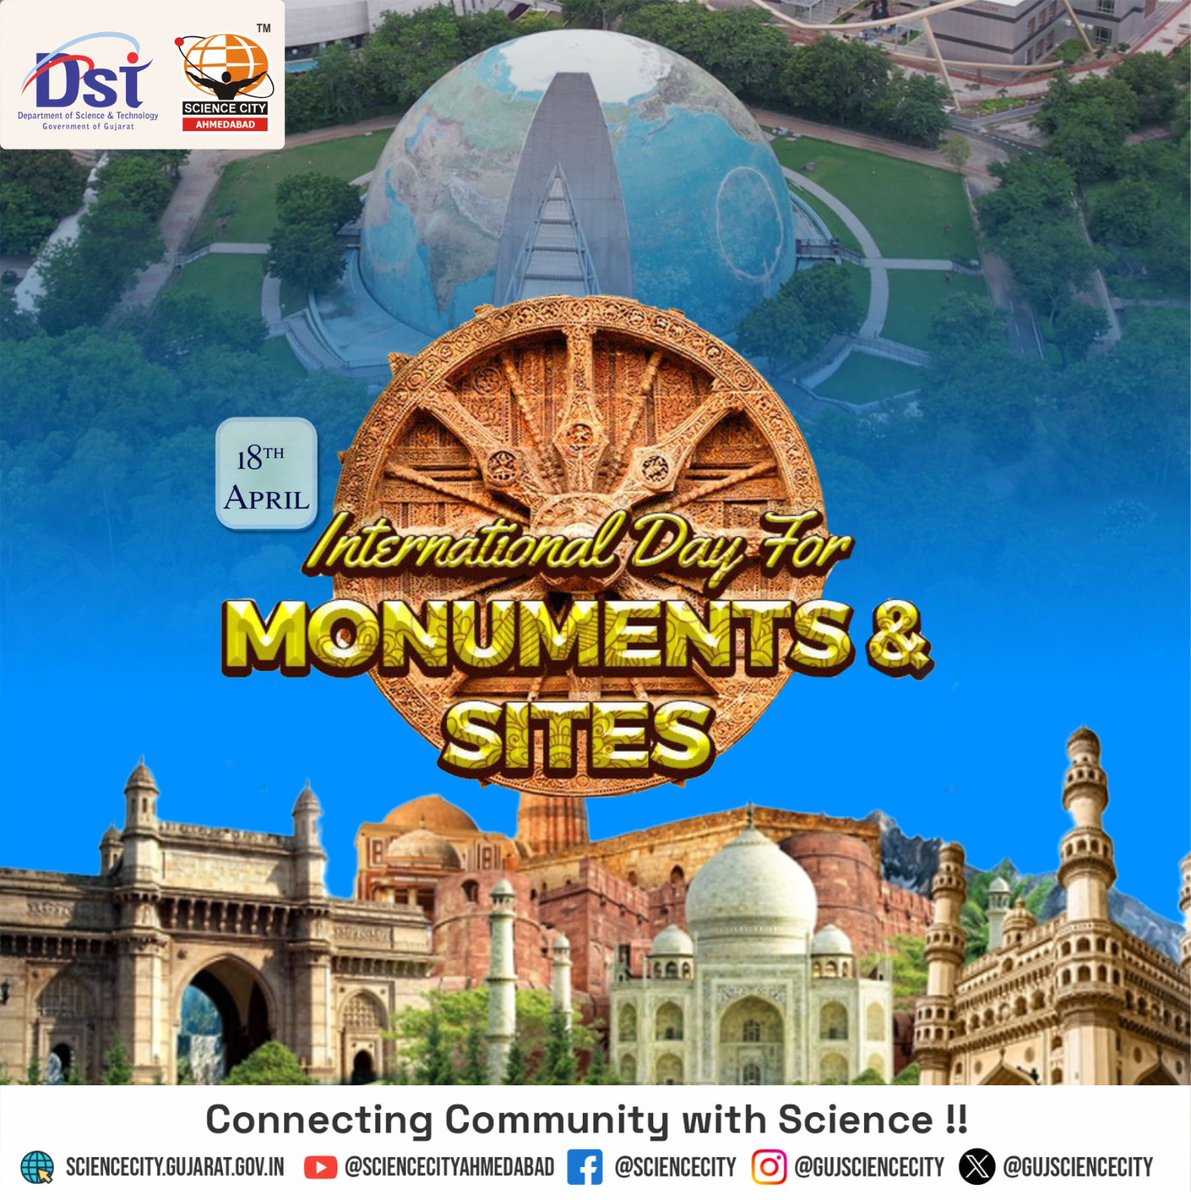 Let us honor our glorious heritage and monuments on this International Day for Monuments and Sites, through which we can learn history and strive to protect cultural identity.
#InternationalDayforMonumentsandSites #ChaloScienceCity  @IndiaDST @dstGujarat @jbvadar @InfoGujarat